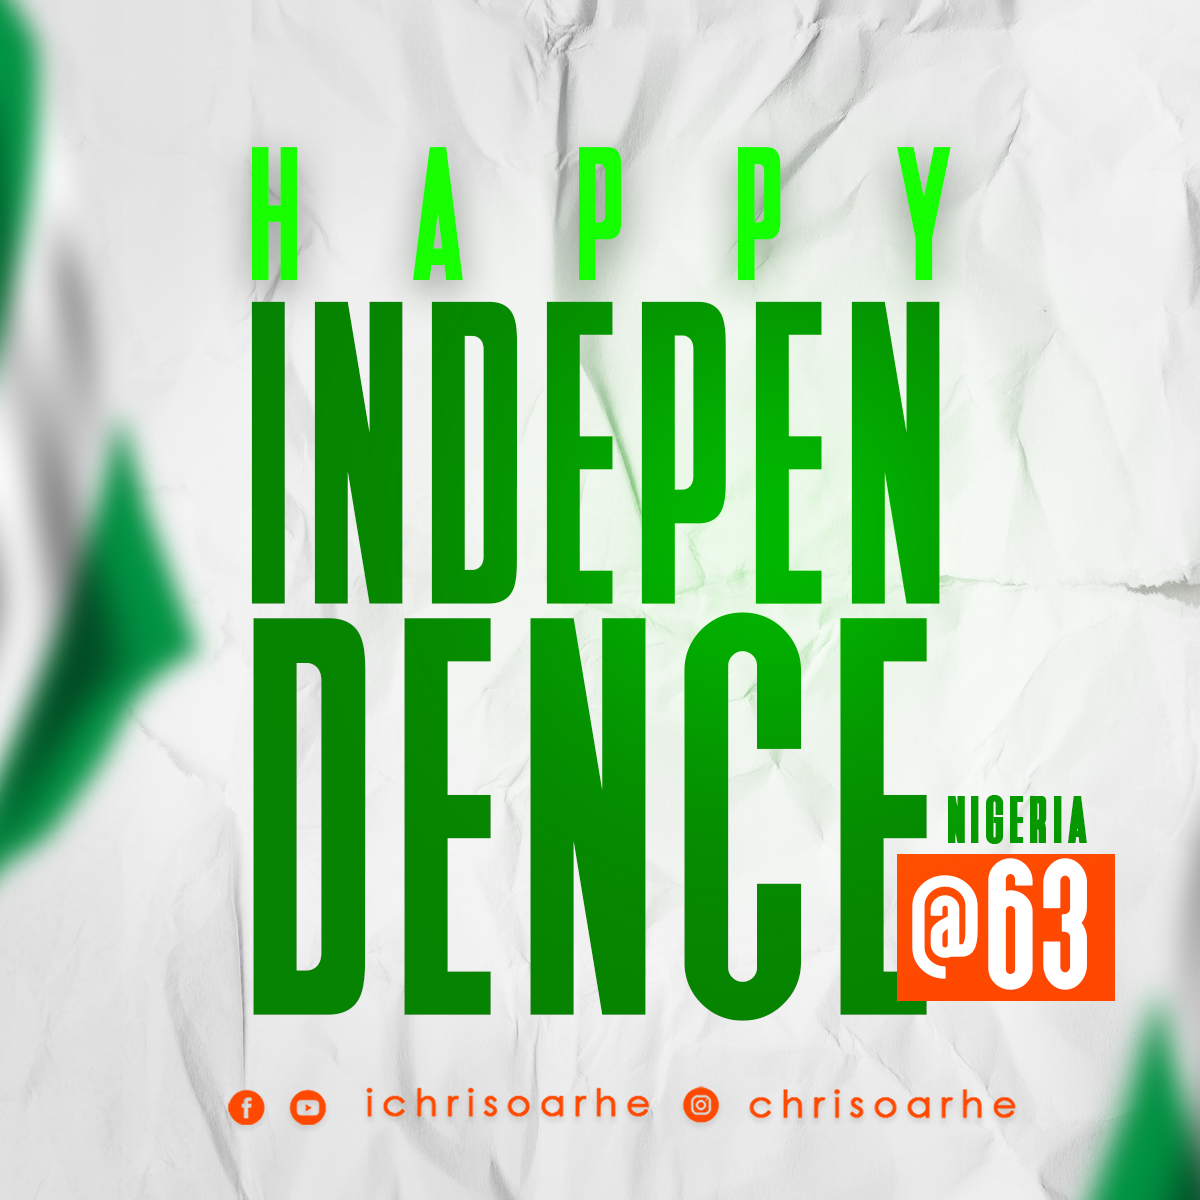 ICHRISOARHE MINISTRY FELICITATE WITH NIGERIA AT 63 post thumbnail image